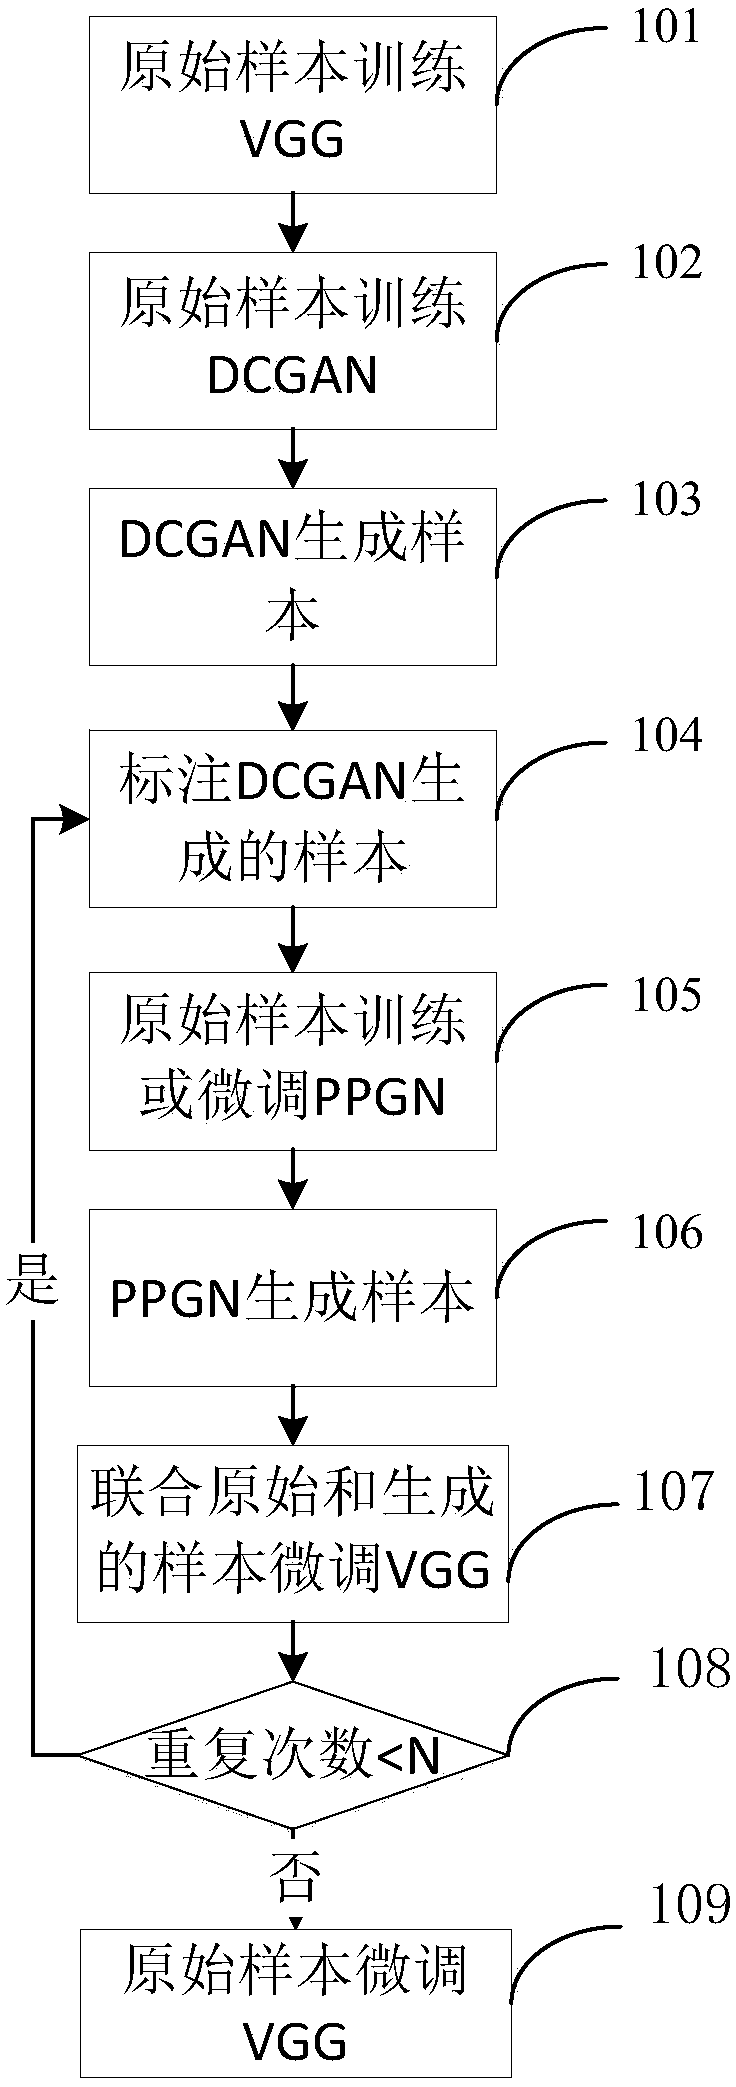 Face recognition method for combined original data and generated data